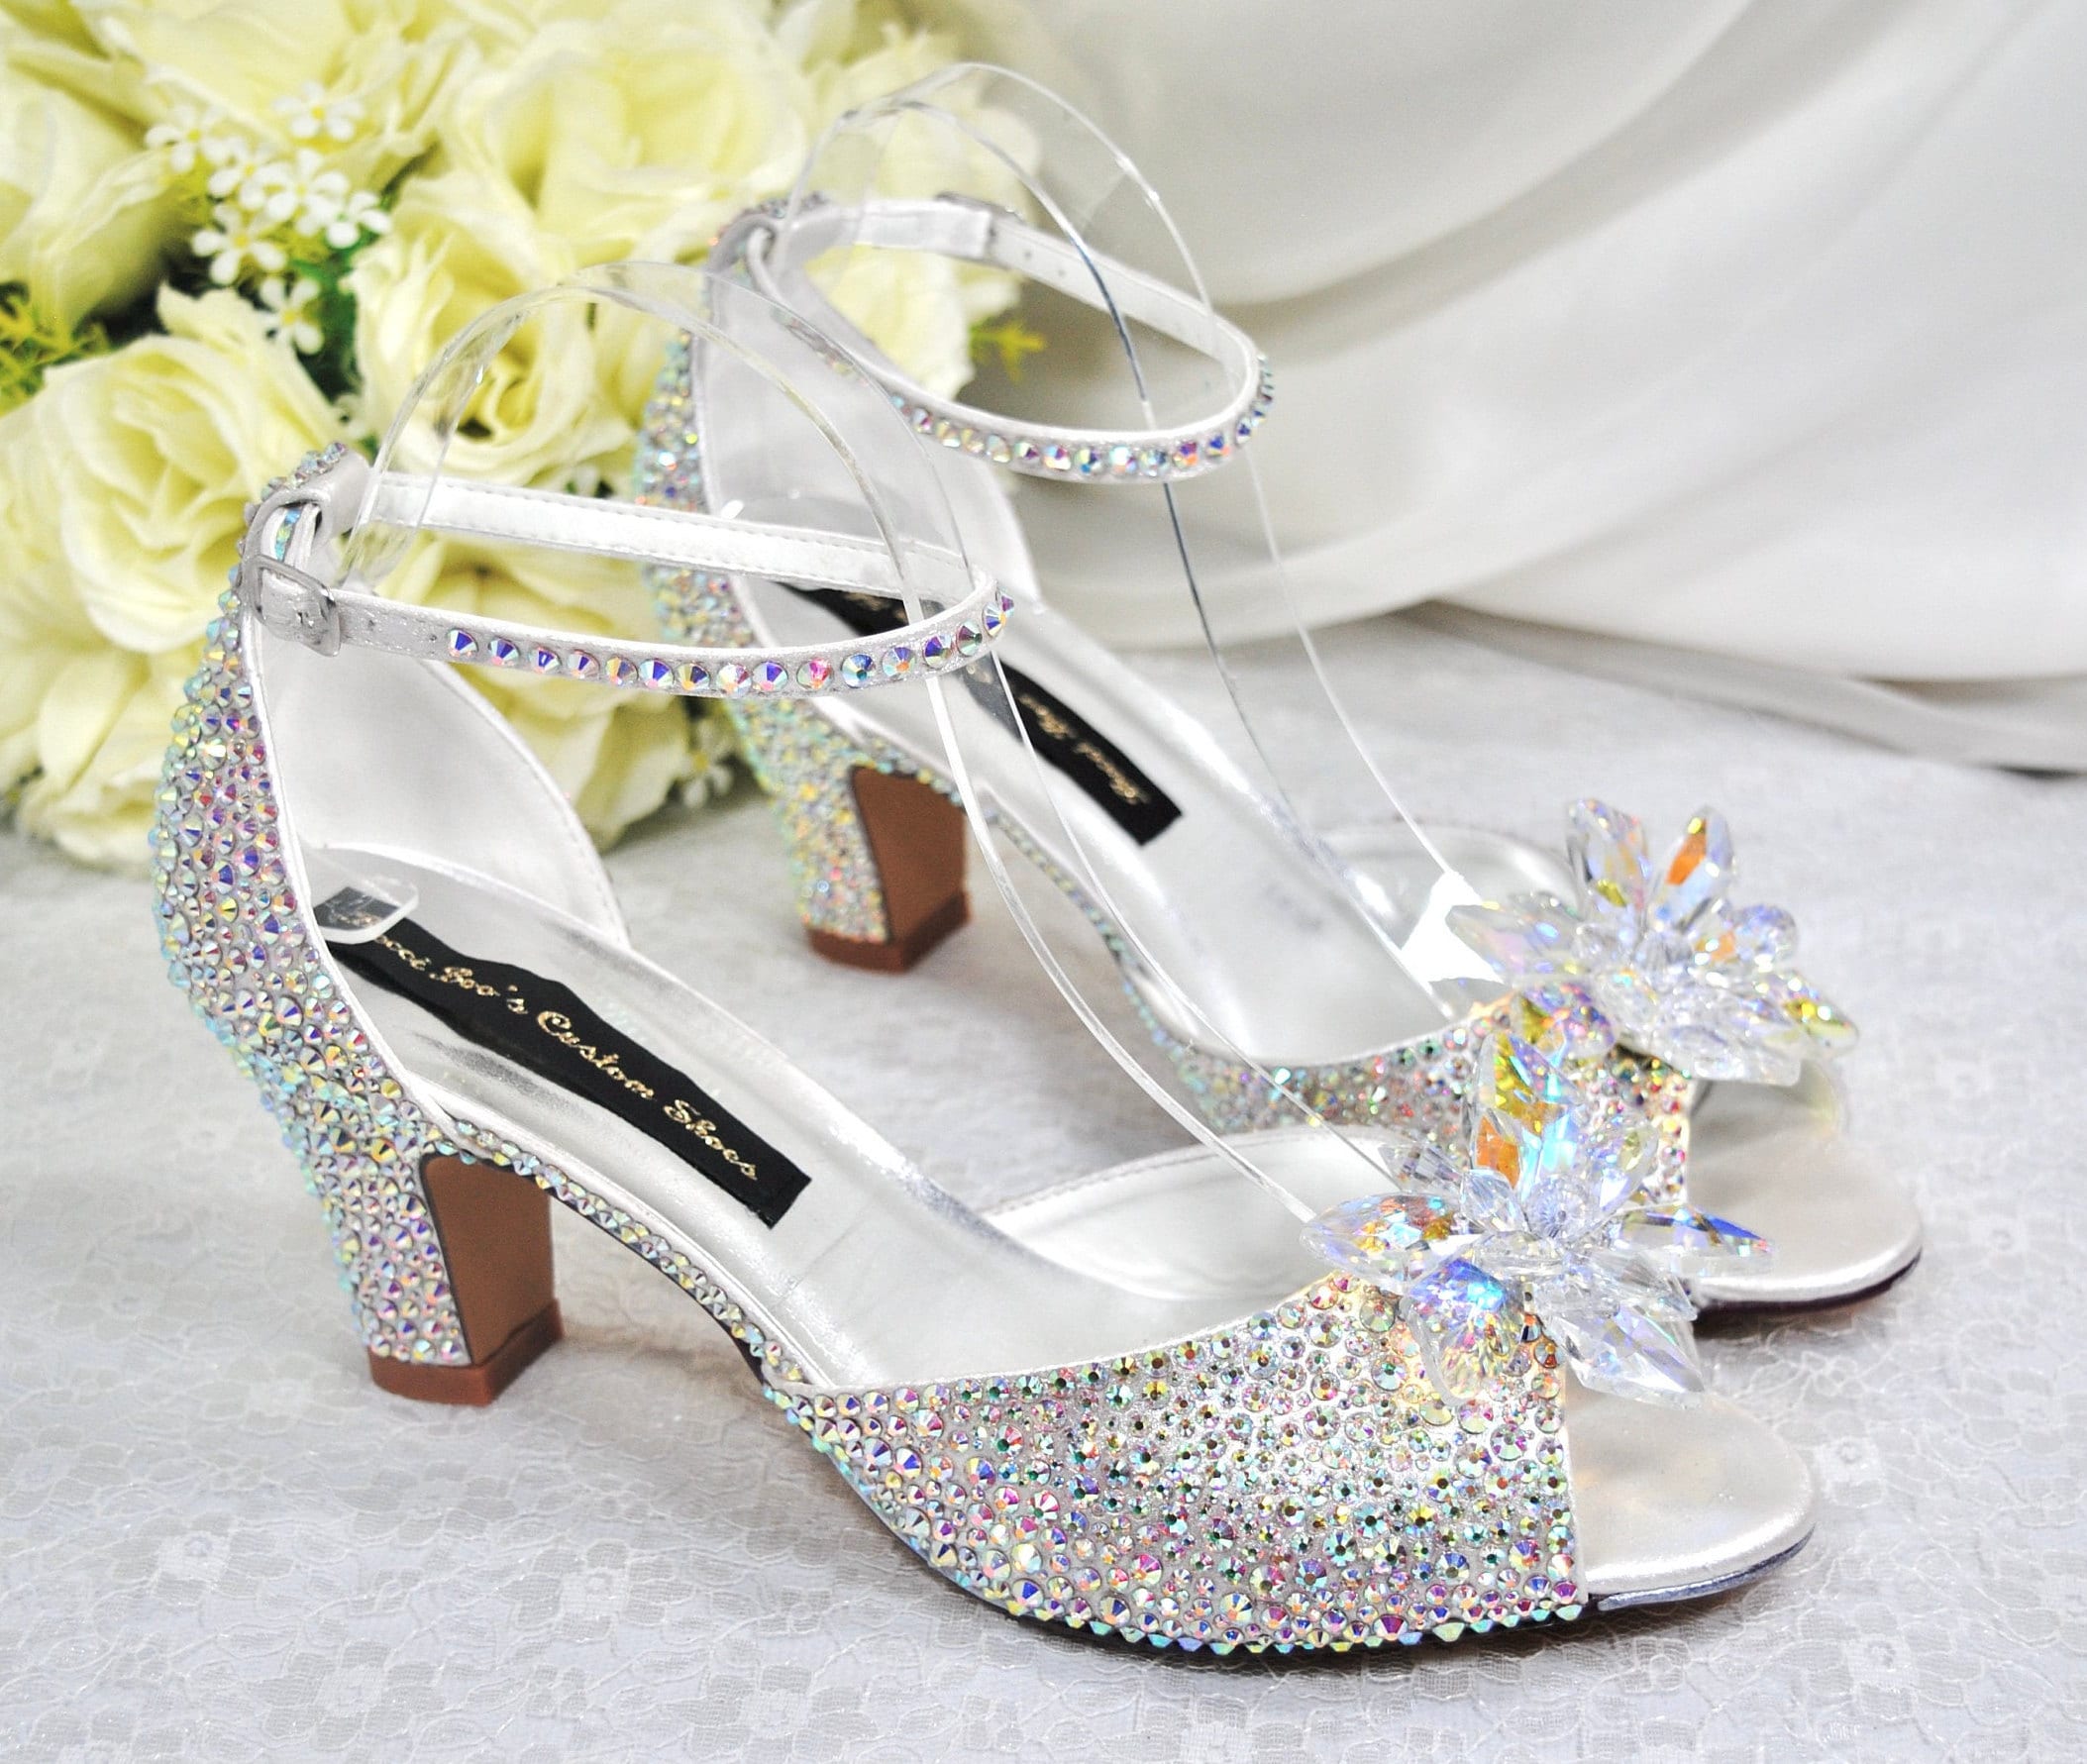 Cinderella Inspired Wedding Shoes That Are Actually Comfortable